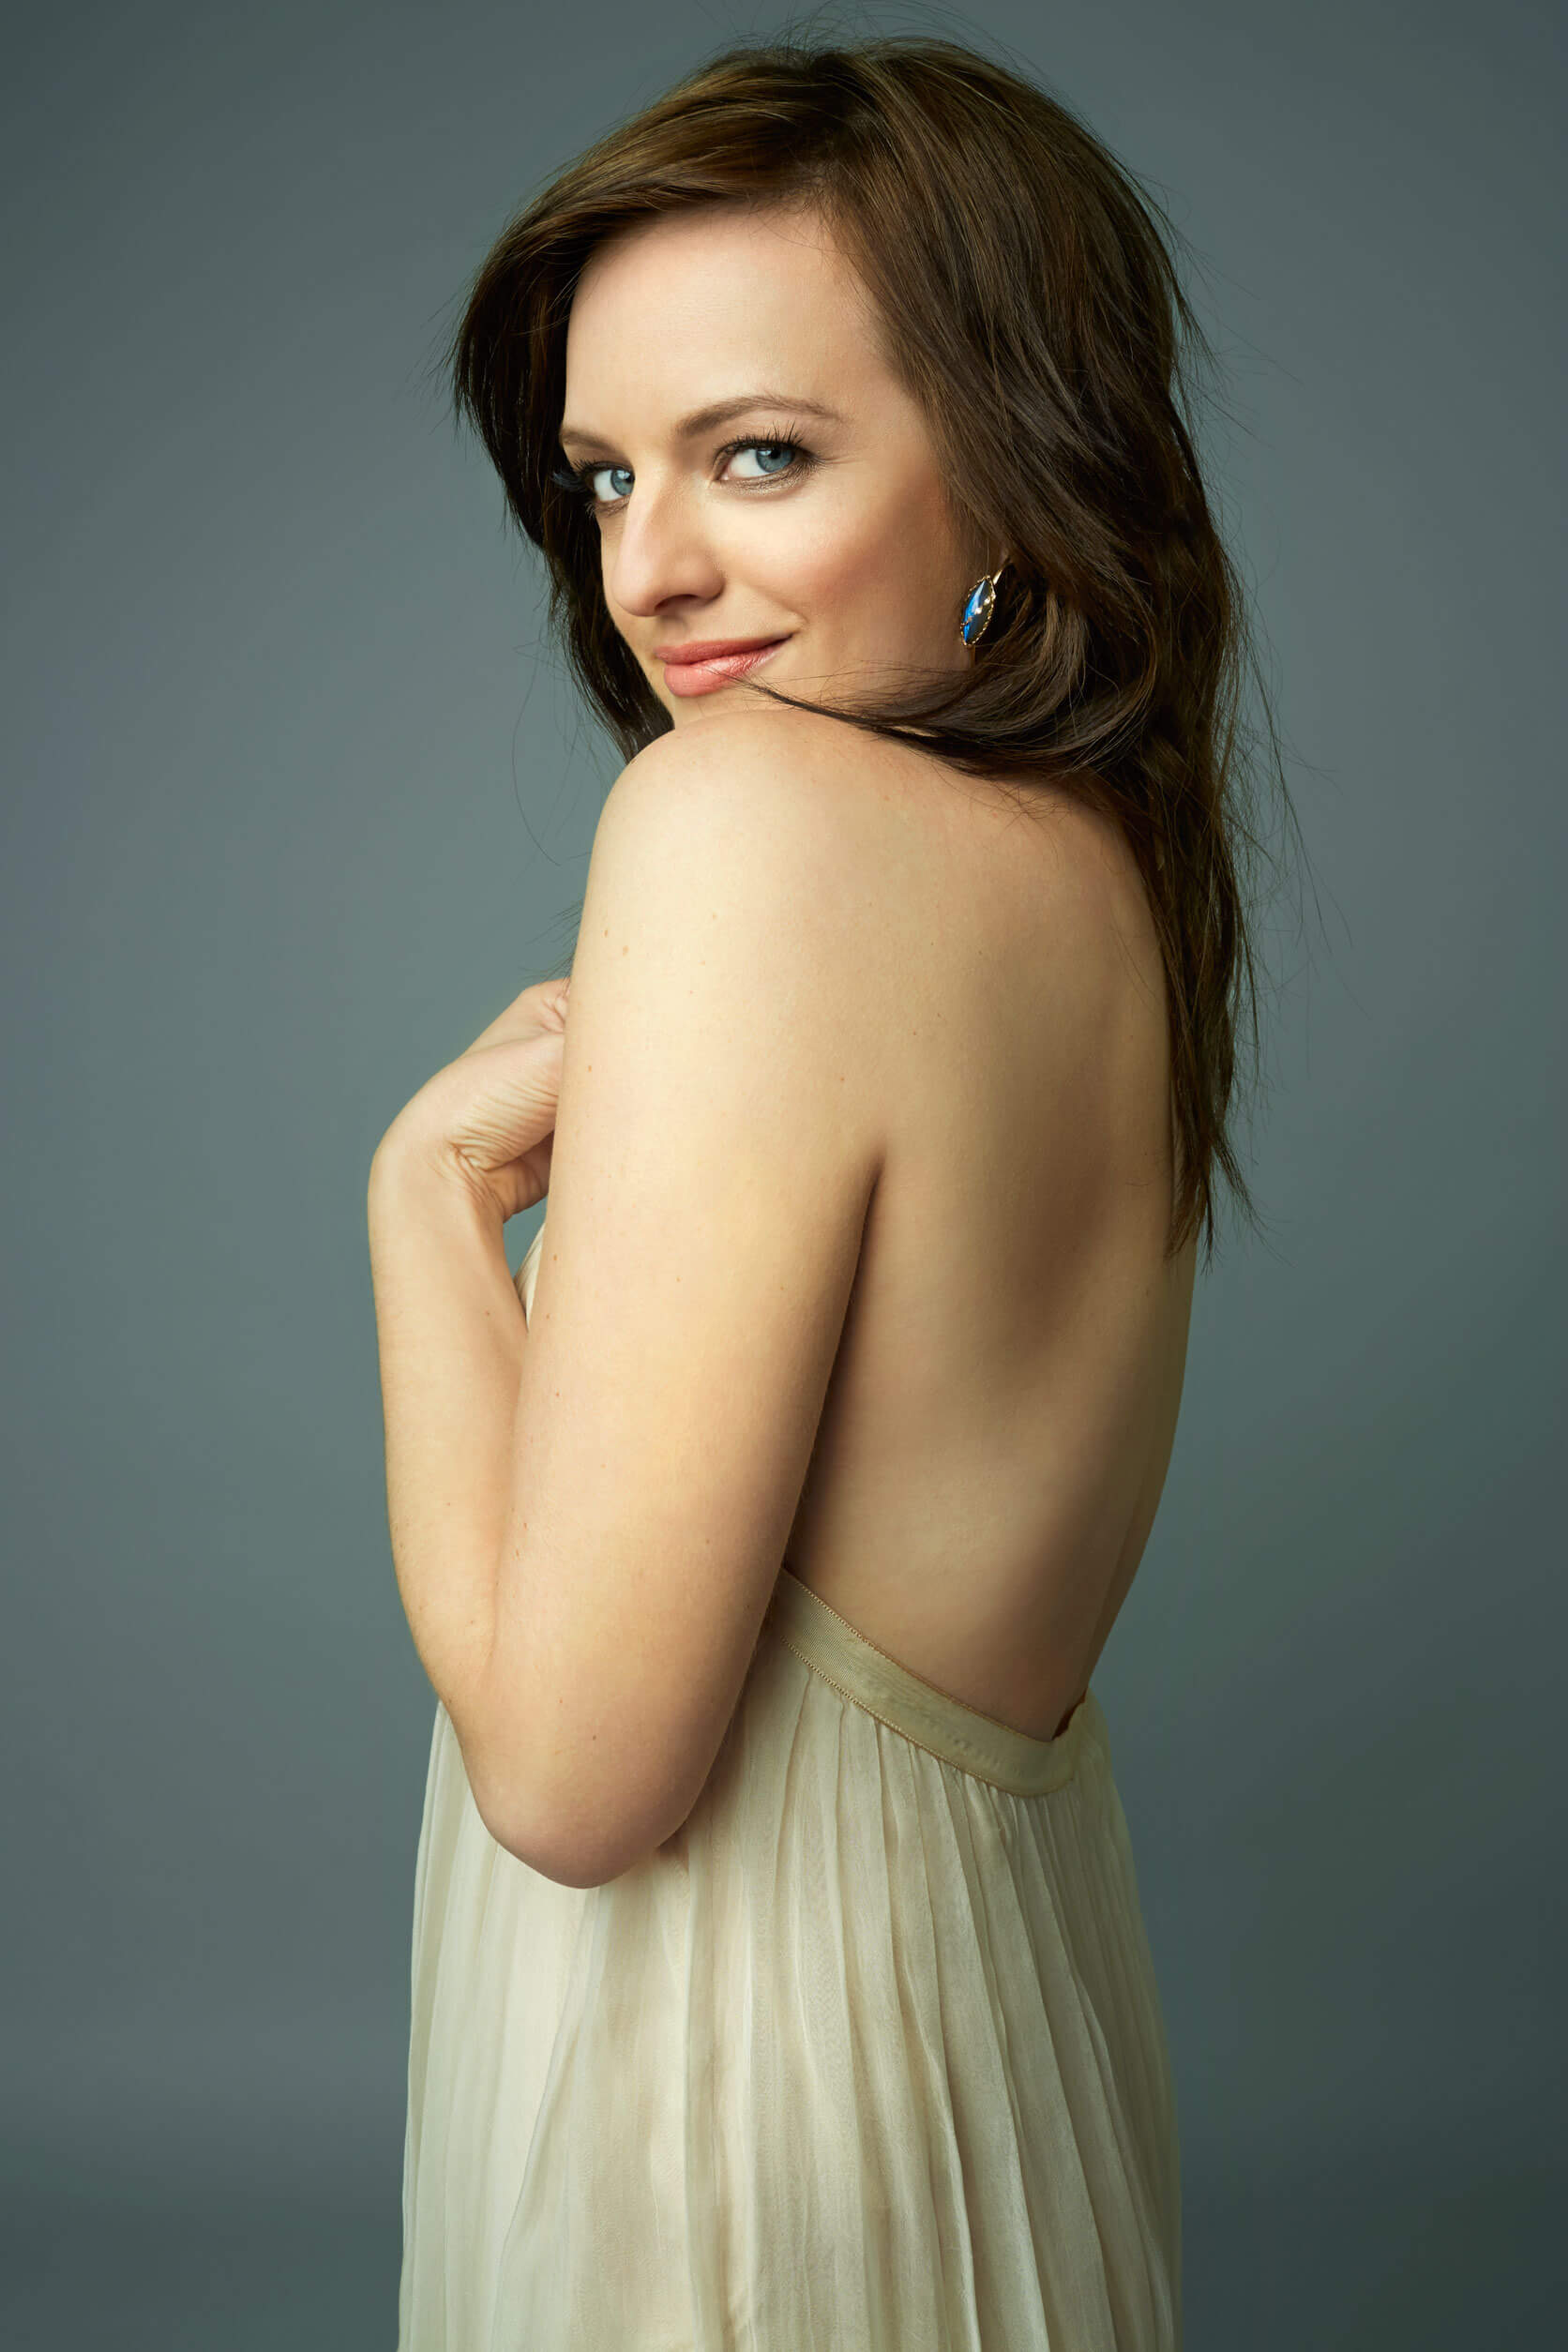 60+ Hot Pictures Of Elisabeth Moss Will Drive You Nuts For Her.